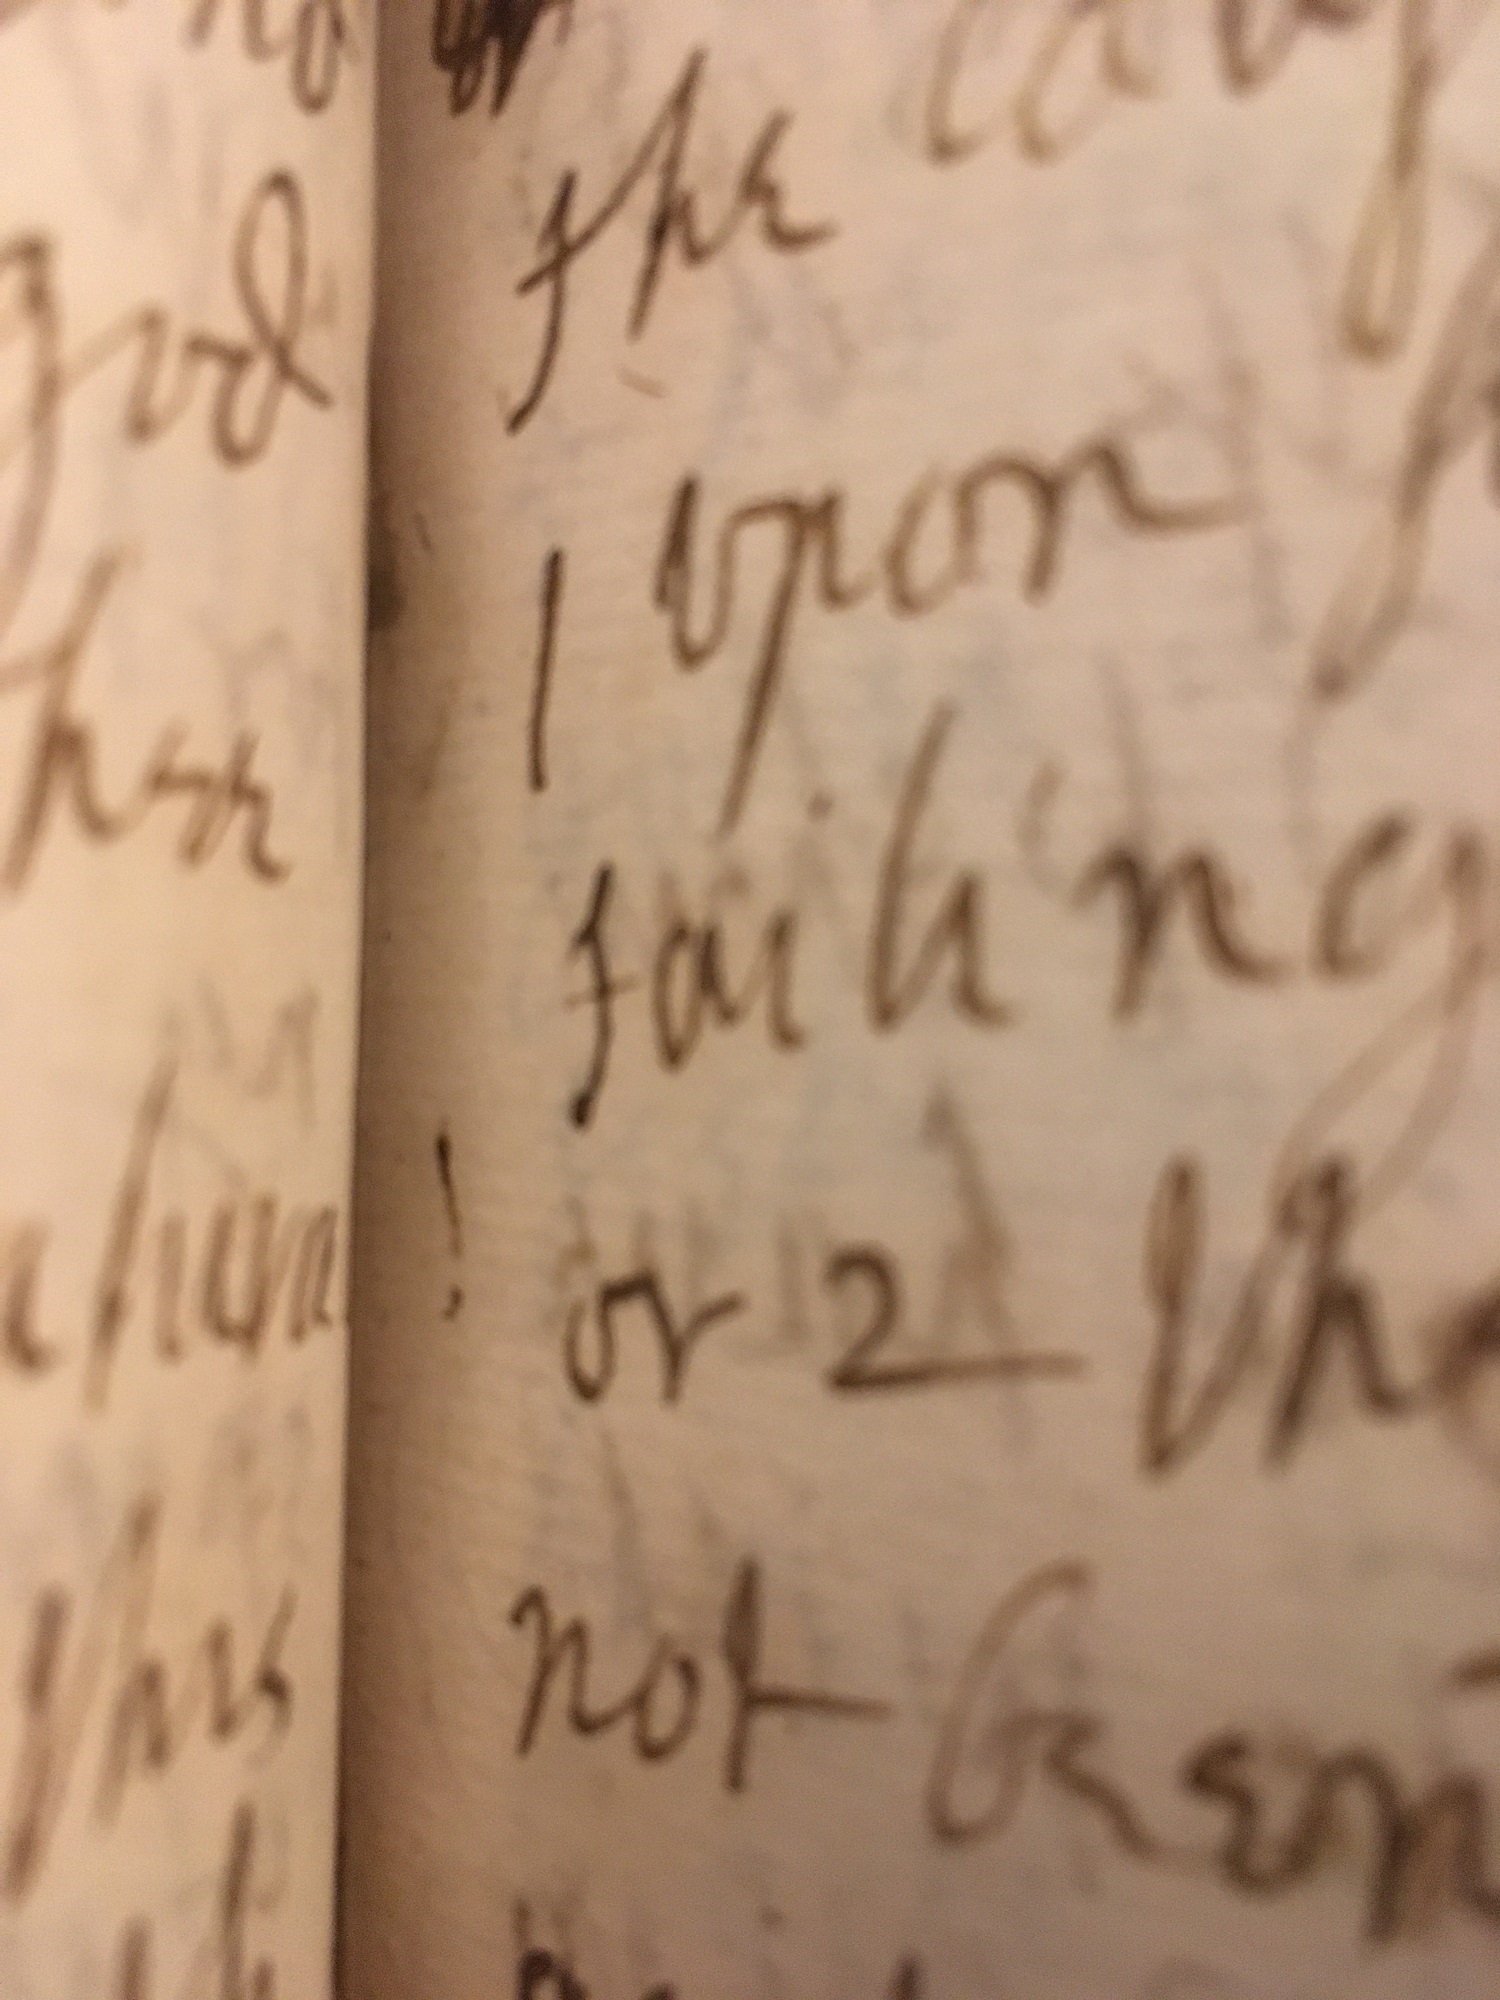 Page detail. Add. MS. 11744